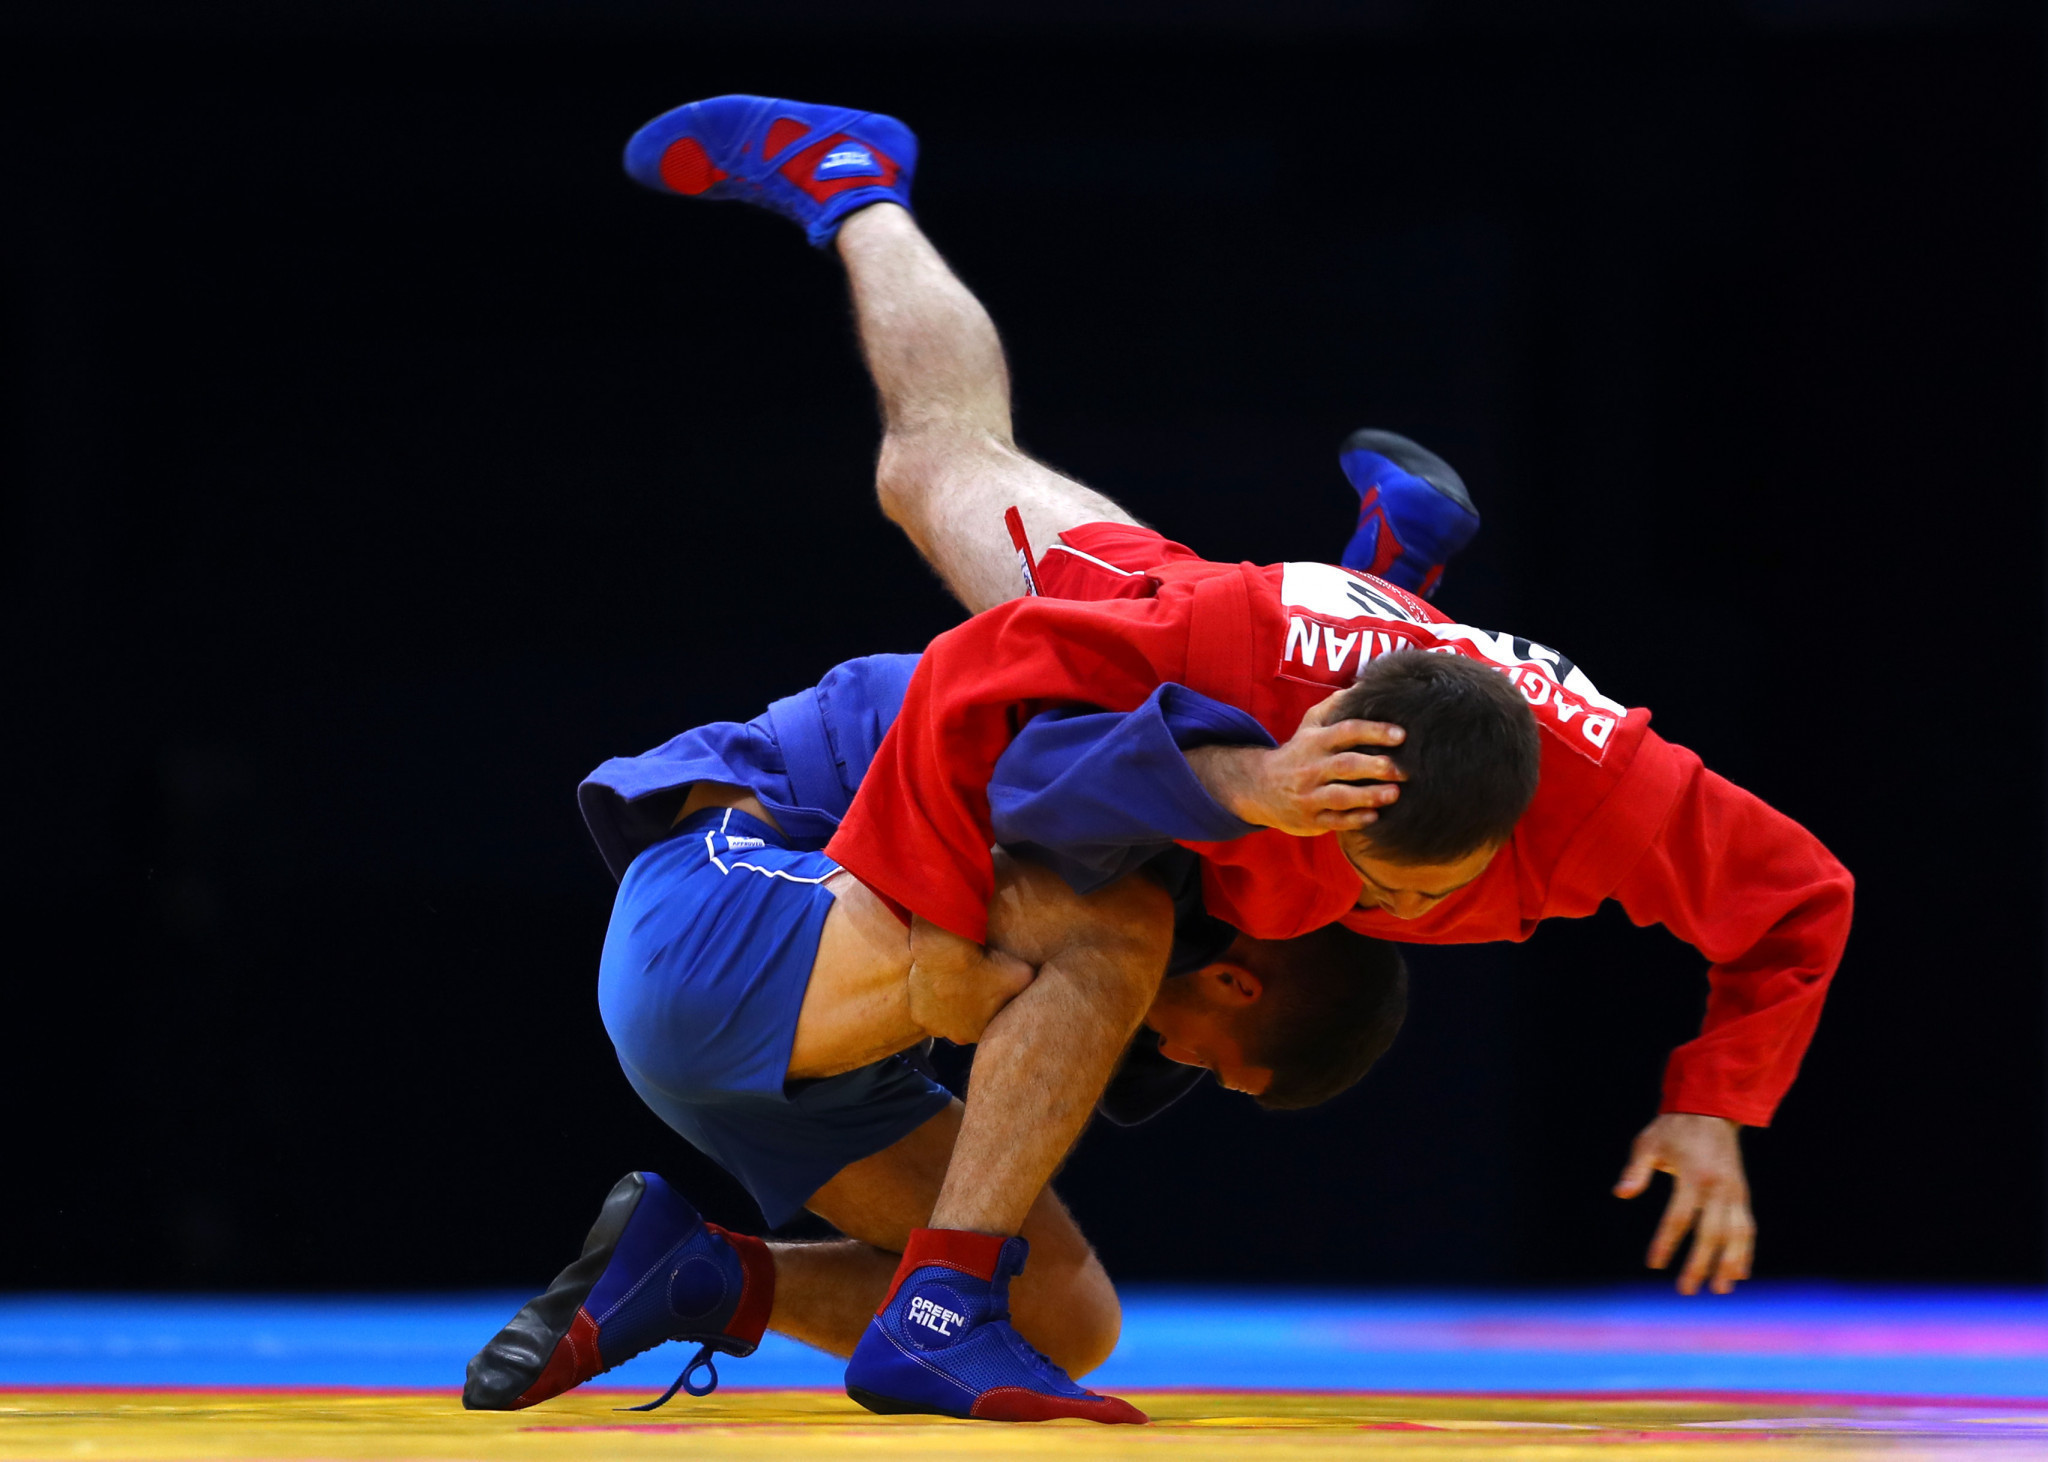 All-Russian Sambo Federation planning to stage major event after cancellation of European Championships